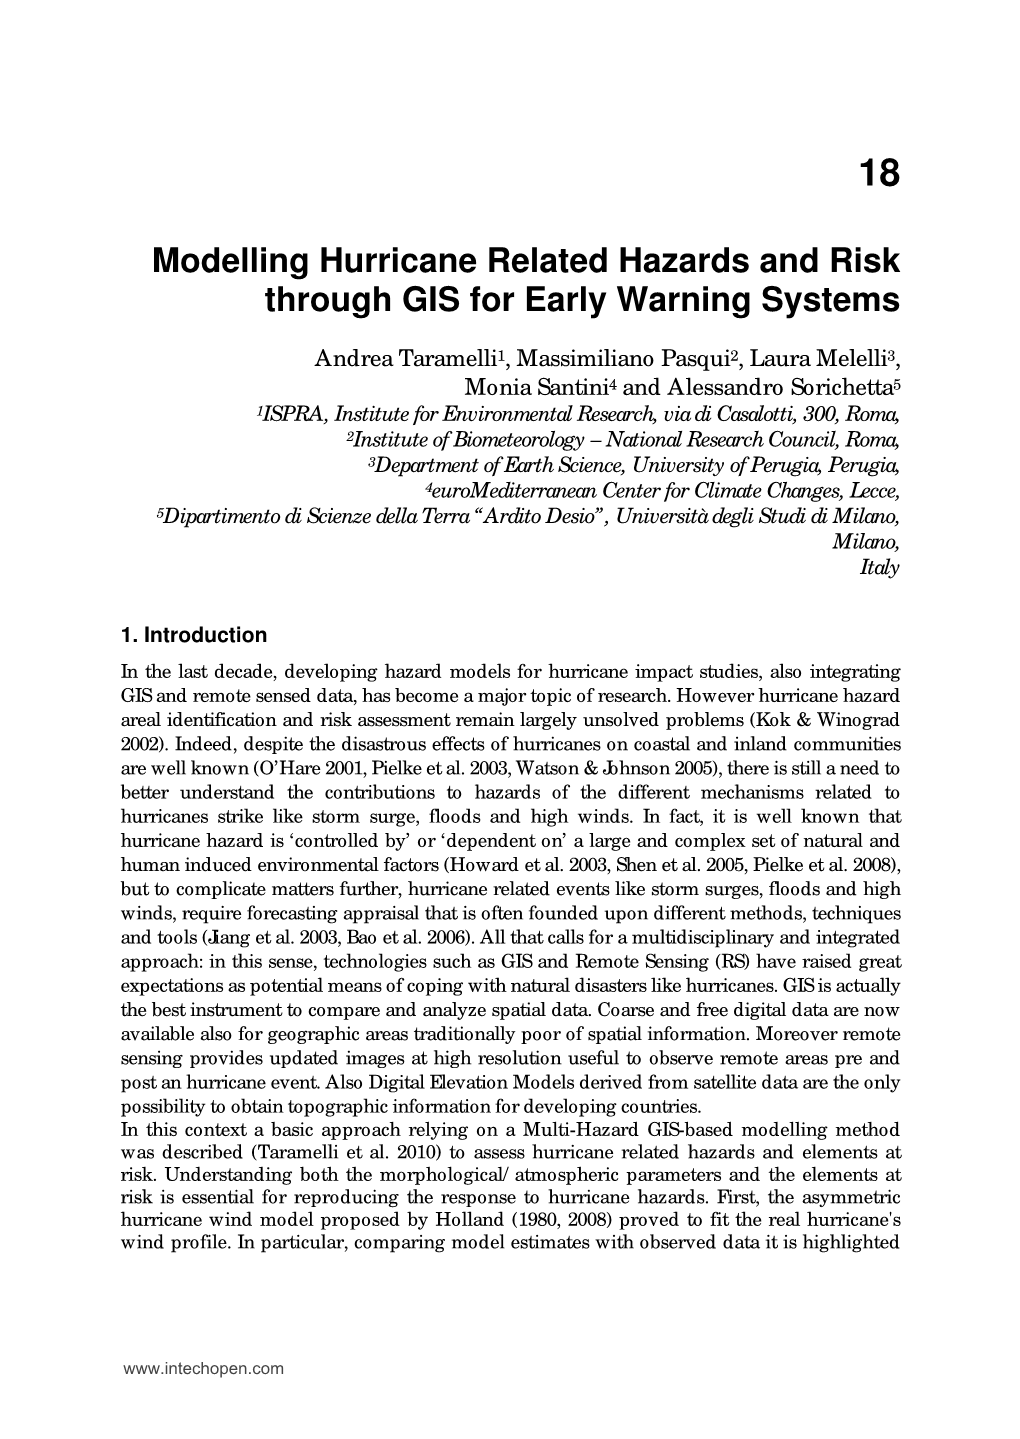 Modelling Hurricane Related Hazards and Risk Through GIS for Early Warning Systems